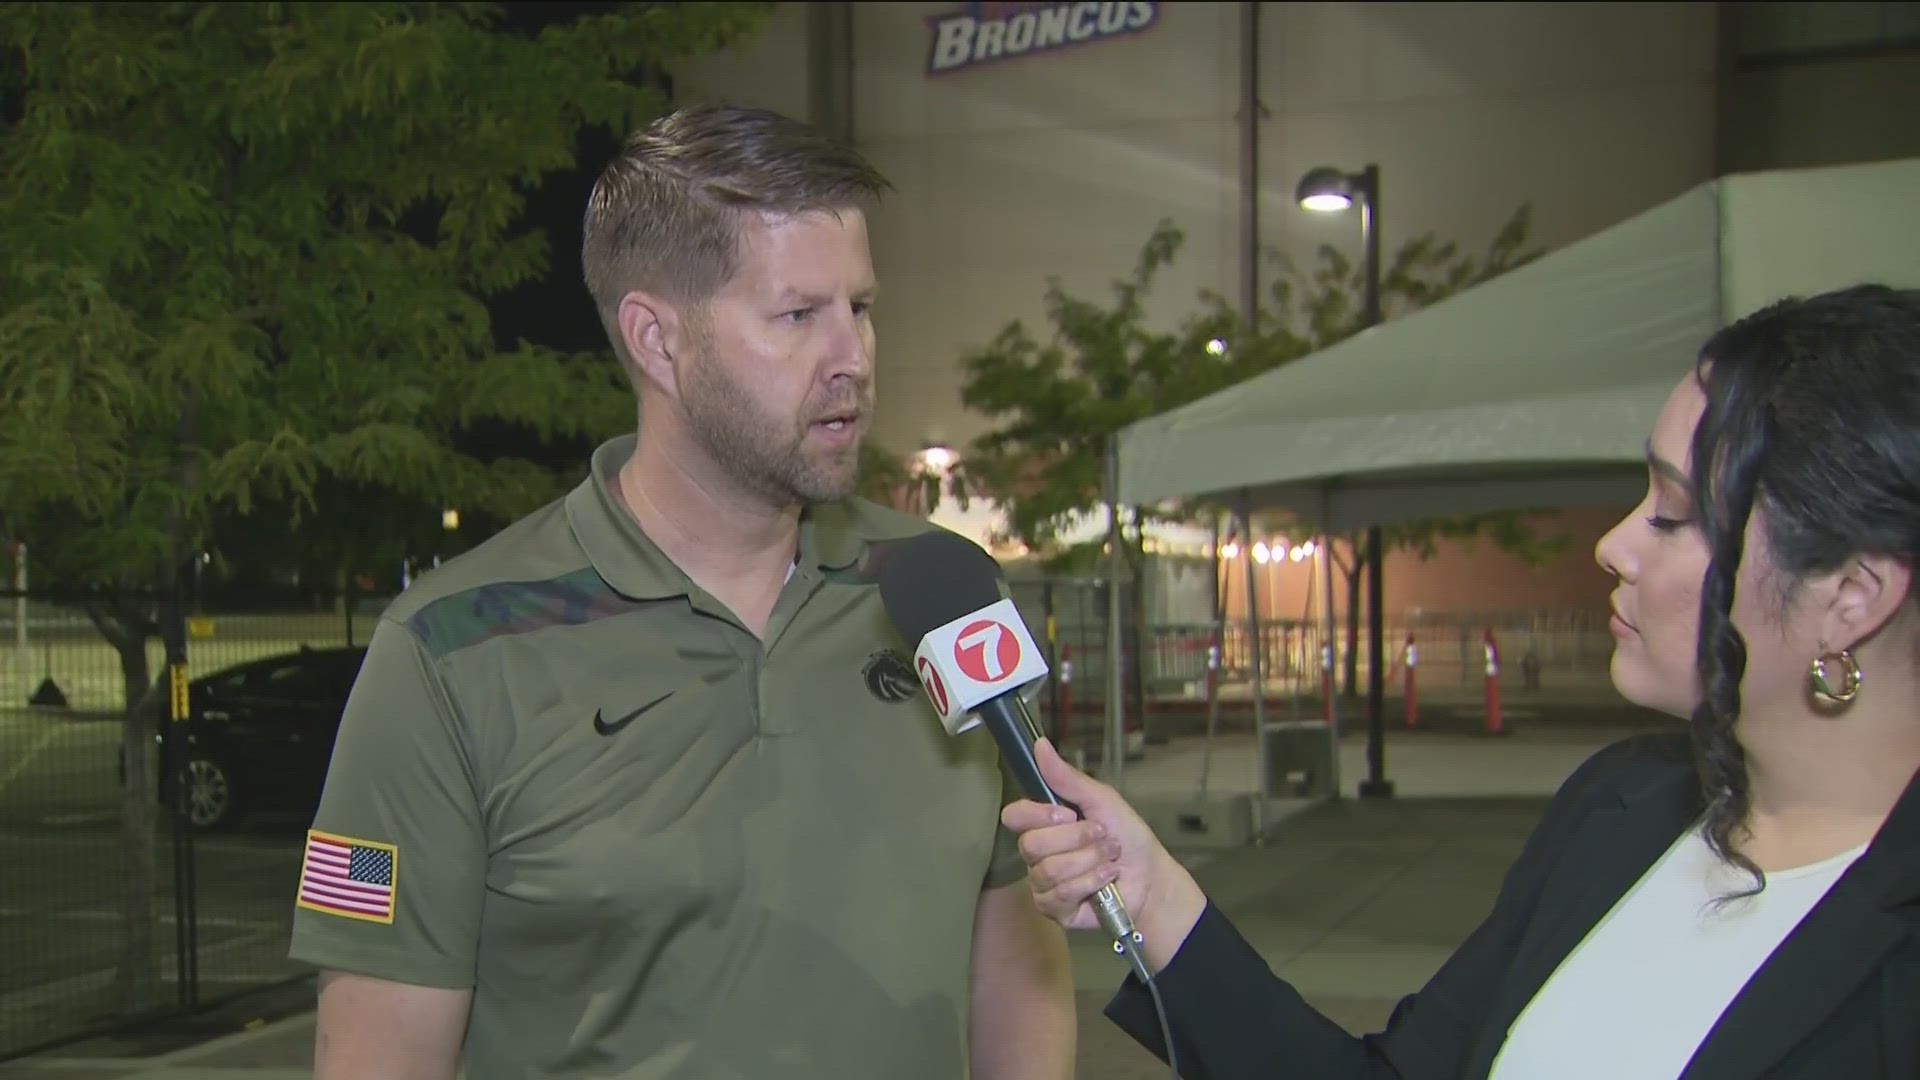 Senior Associate Athletic Director of Operations and Governance, Nathan Burk, joins KTVB's Brenda Rodriguez to discuss entry procedures for Bronco football games.